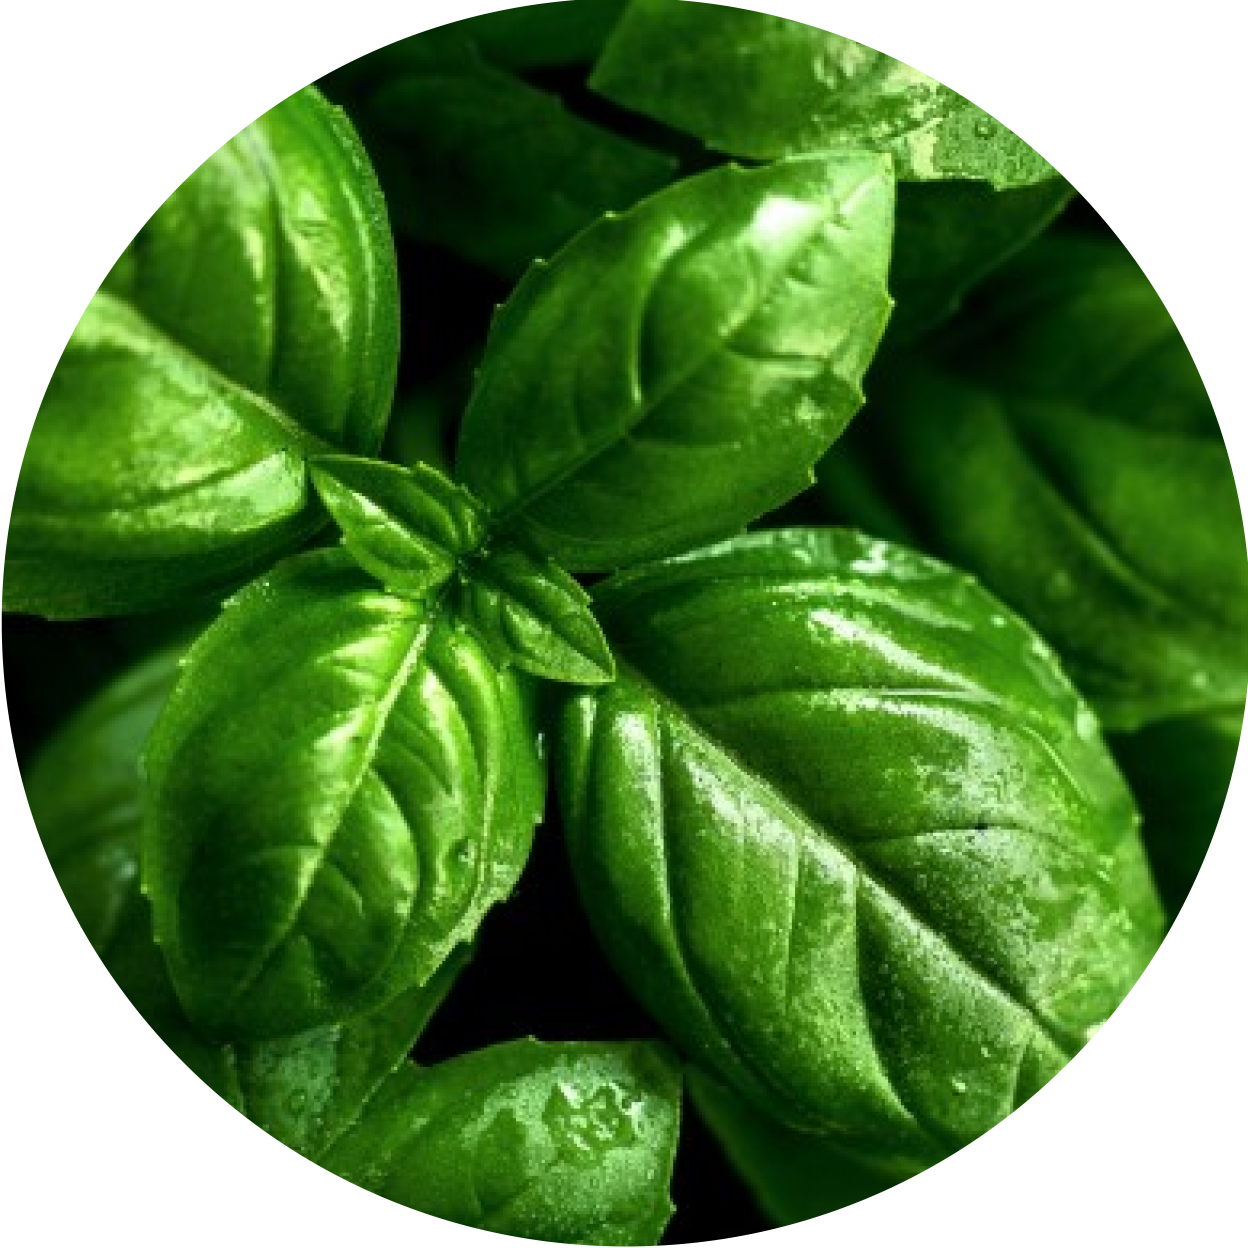 Basil - 6 Natural Pain Relievers You Can Try At Home